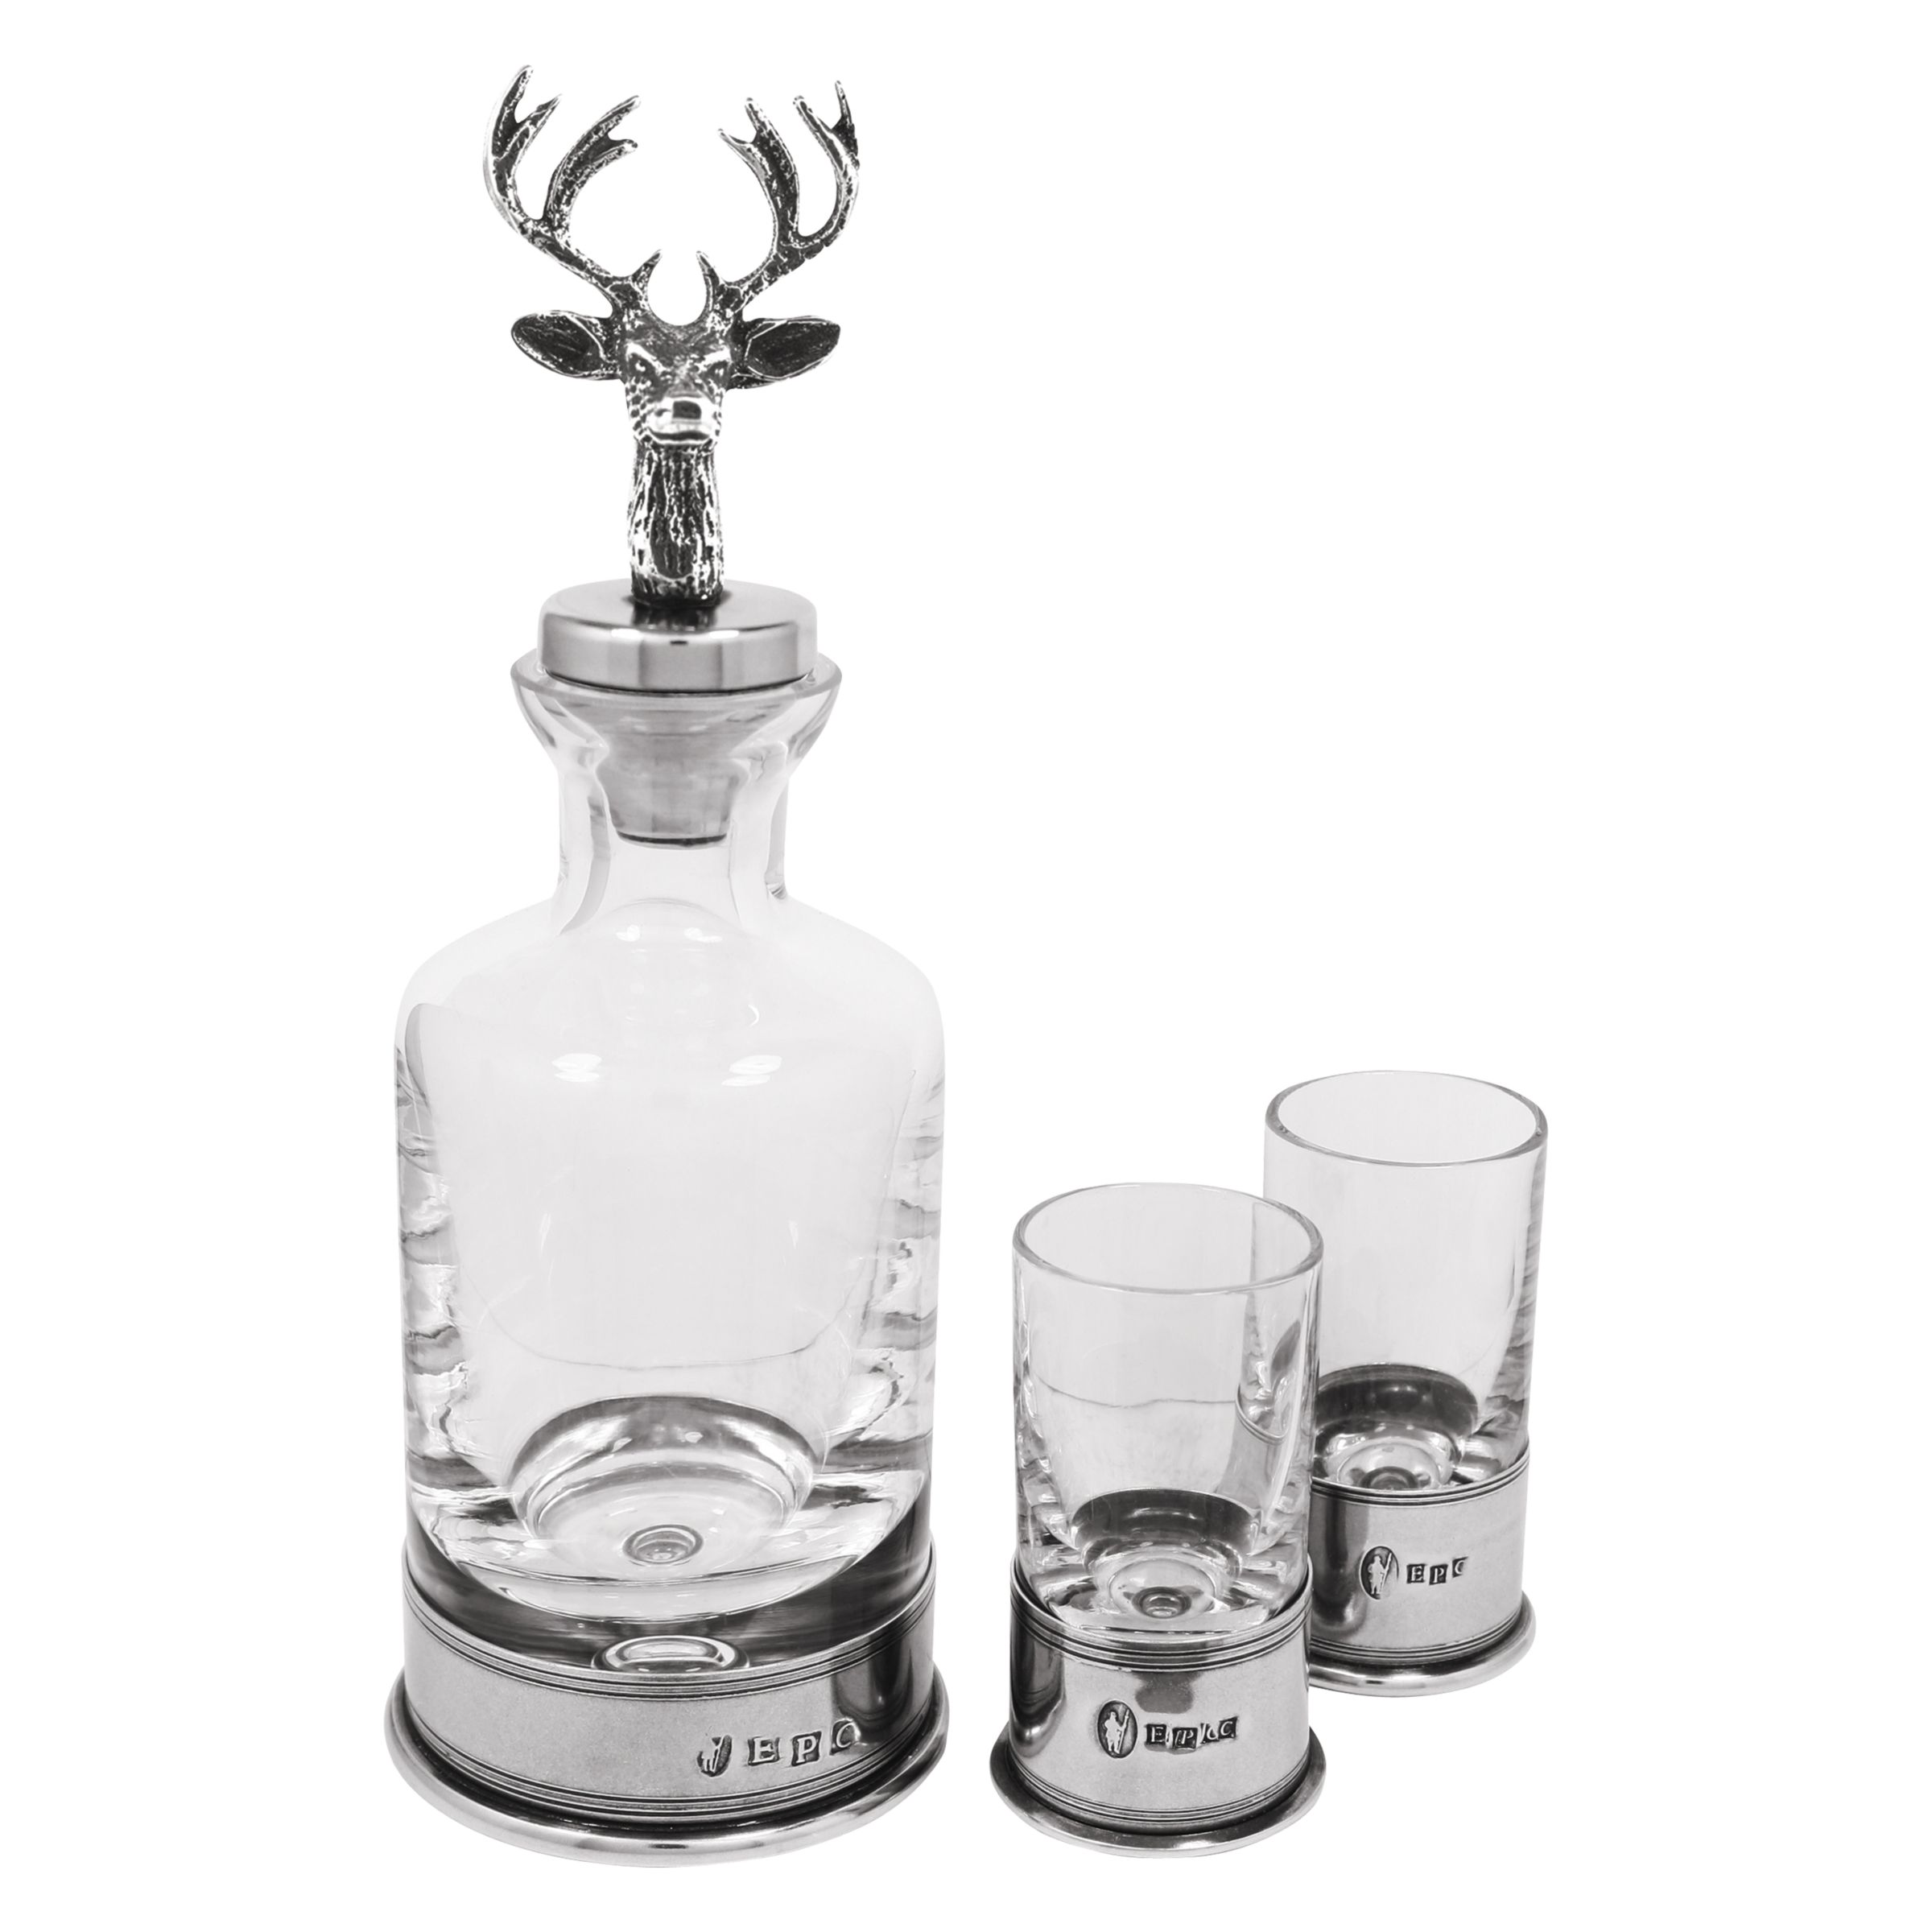 Heritage Pewter Decanter, Decanter Sets, Beer and Wine Gift Sets